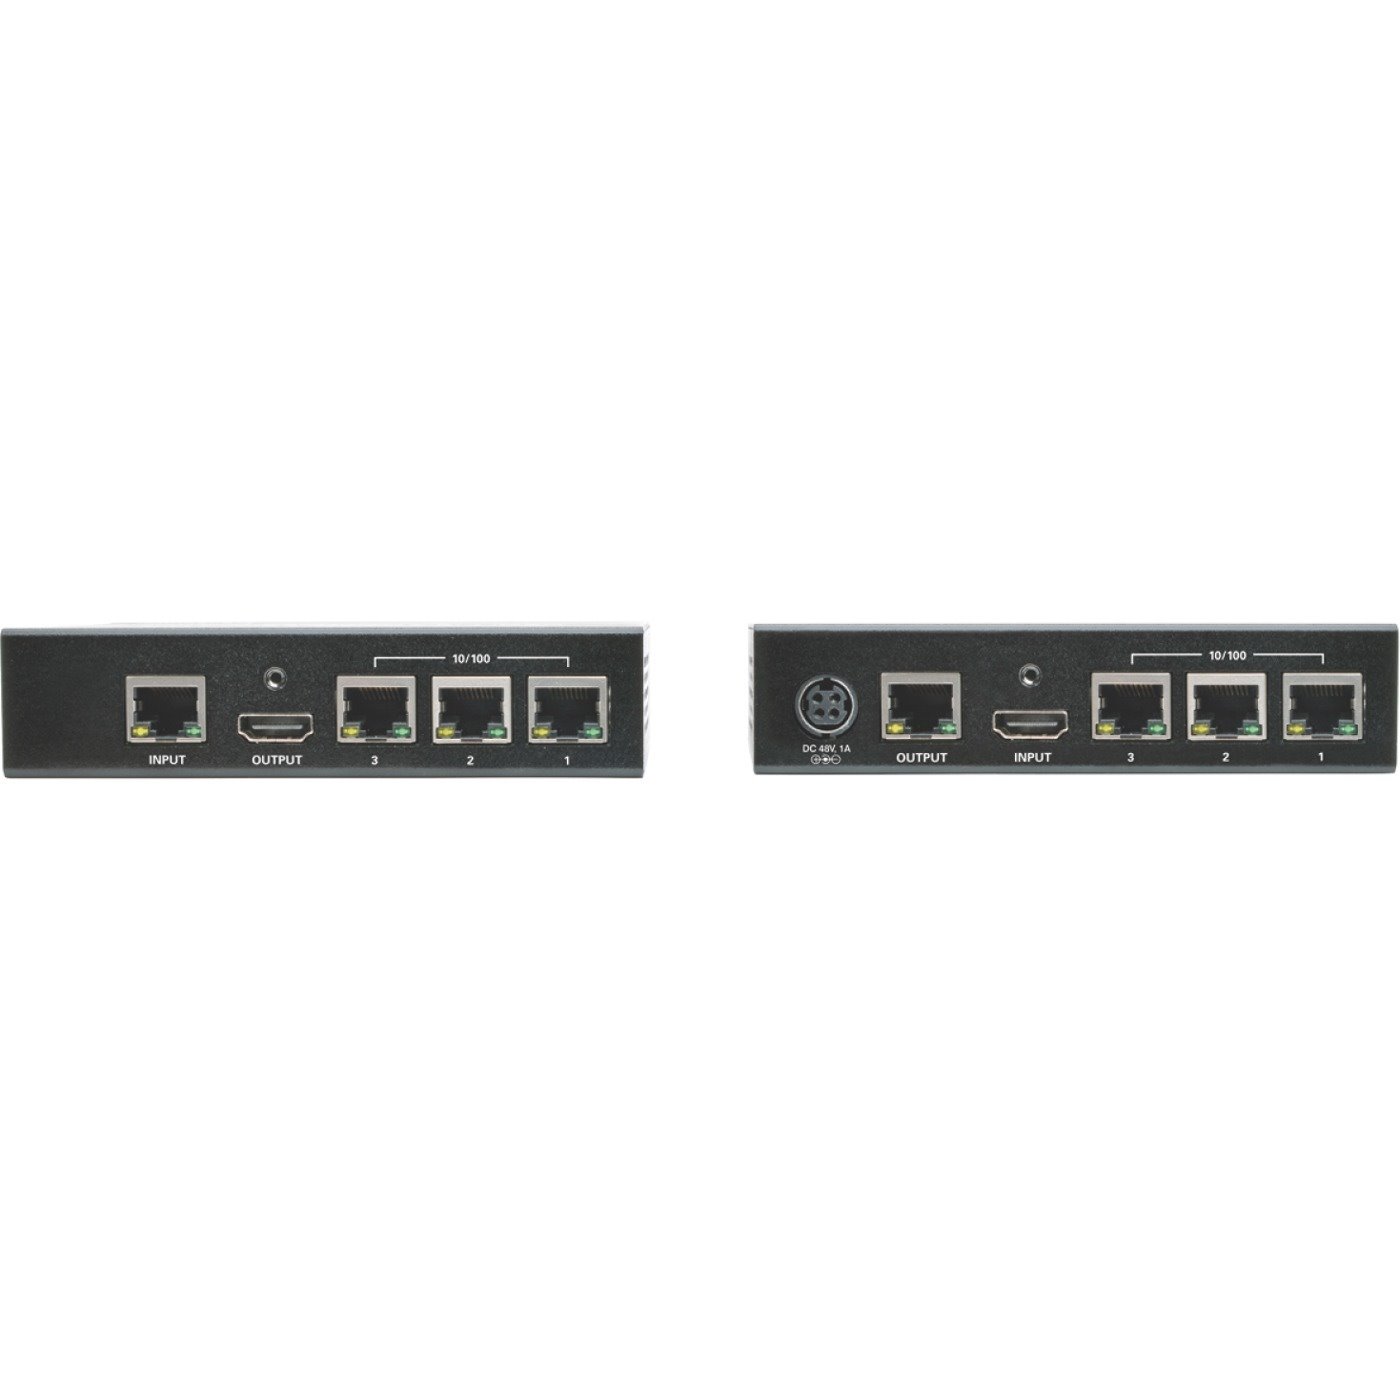 Tripp Lite by Eaton HDBaseT HDMI over Cat5e/6/6a Extender Kit with Ethernet, Power, Serial & IR Control, 4K x 2K 30 Hz UHD / 1080p 60 Hz, Up to 328 ft. (100 m), TAA